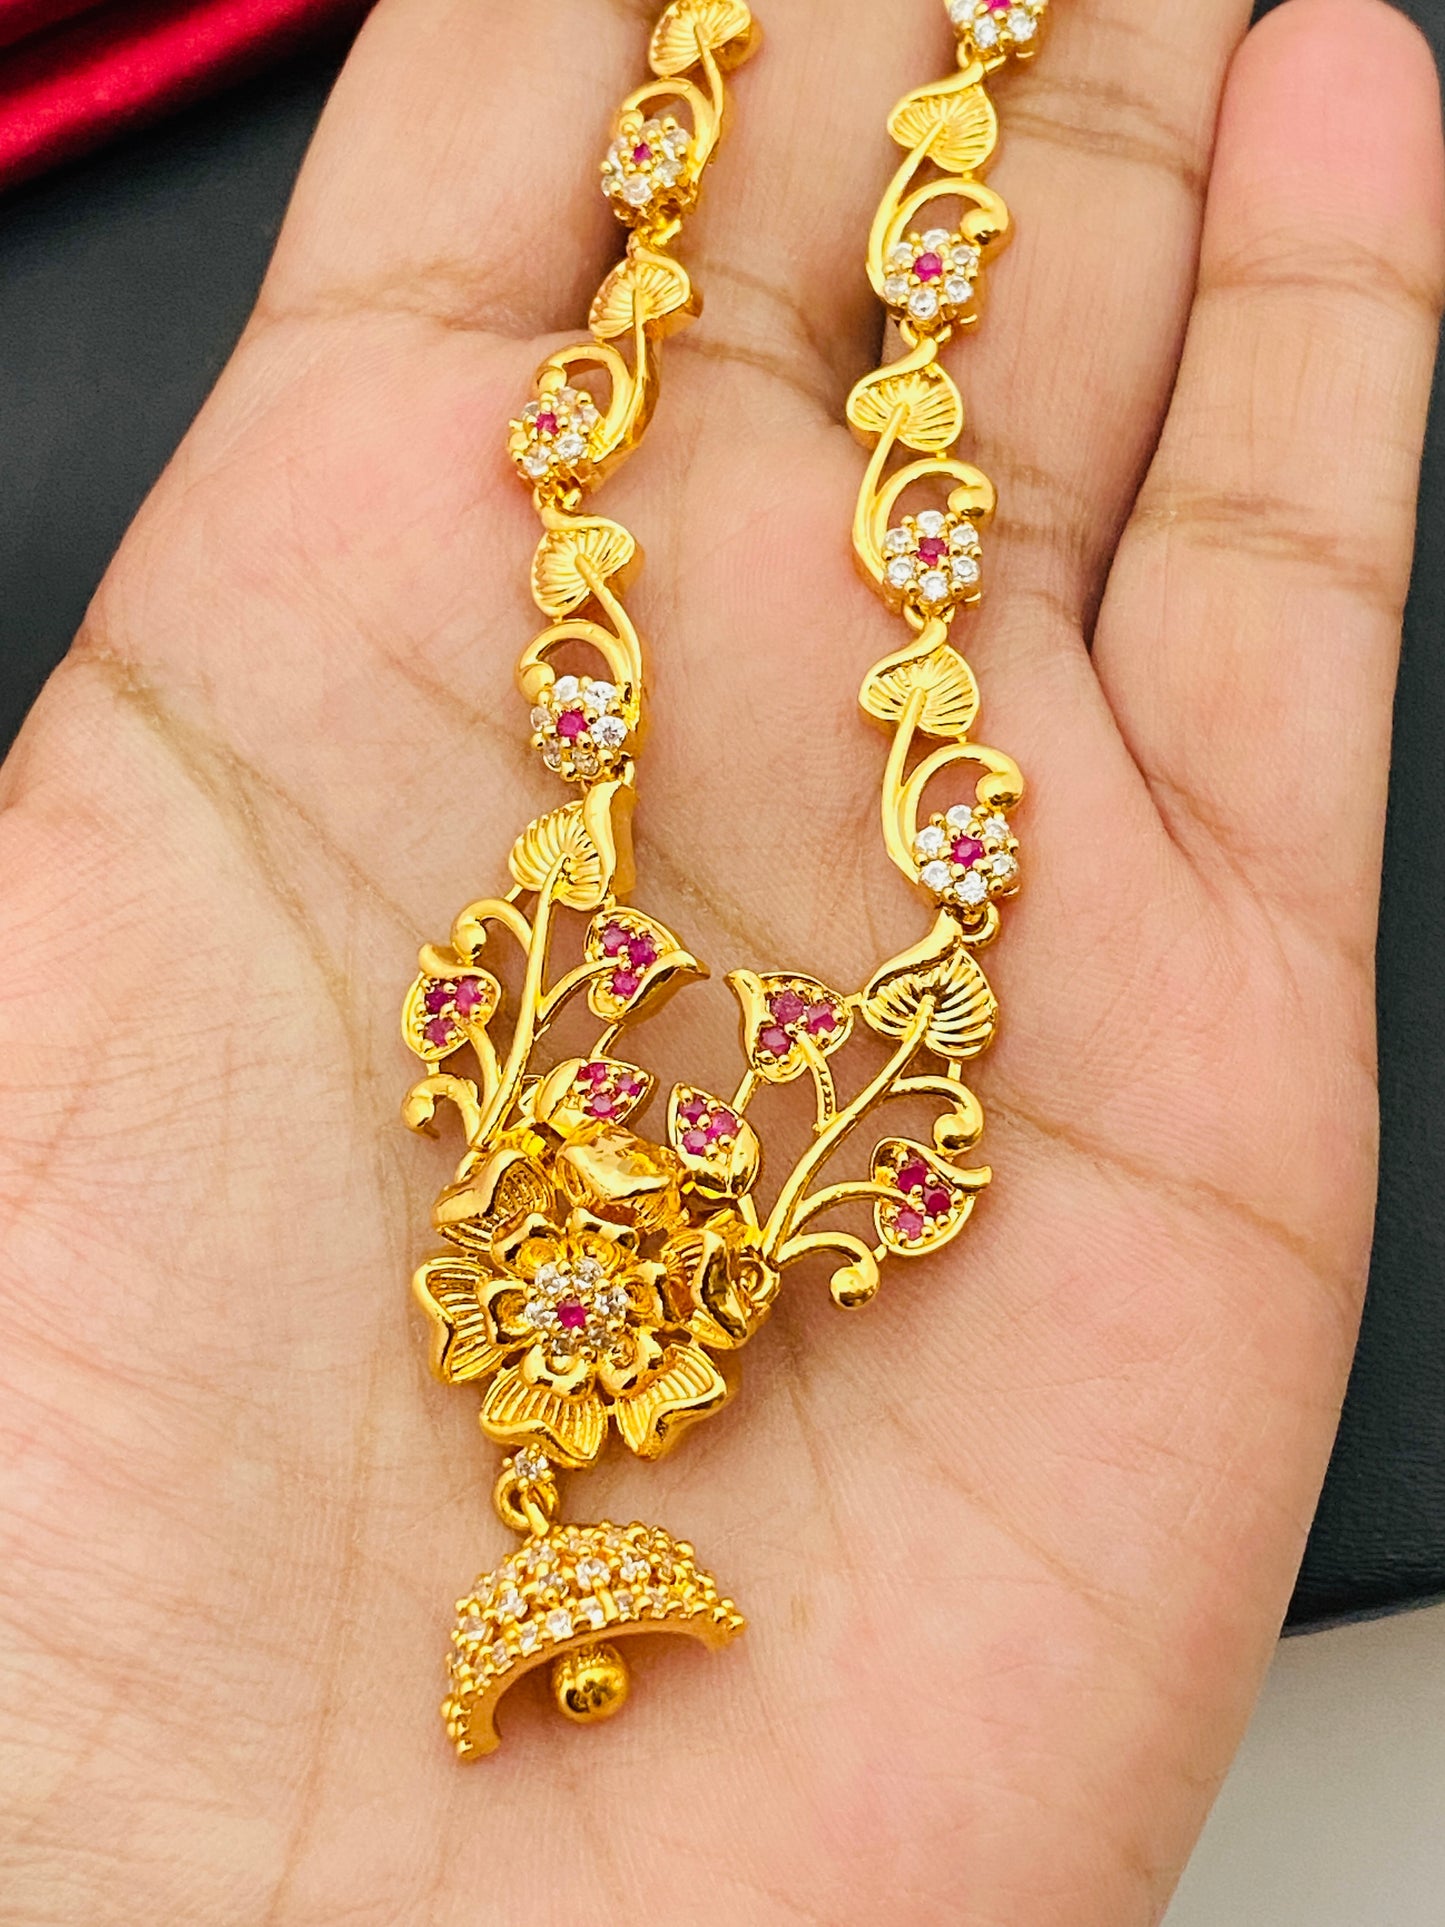 Indian Gold Plated Sets In Litchfield Park